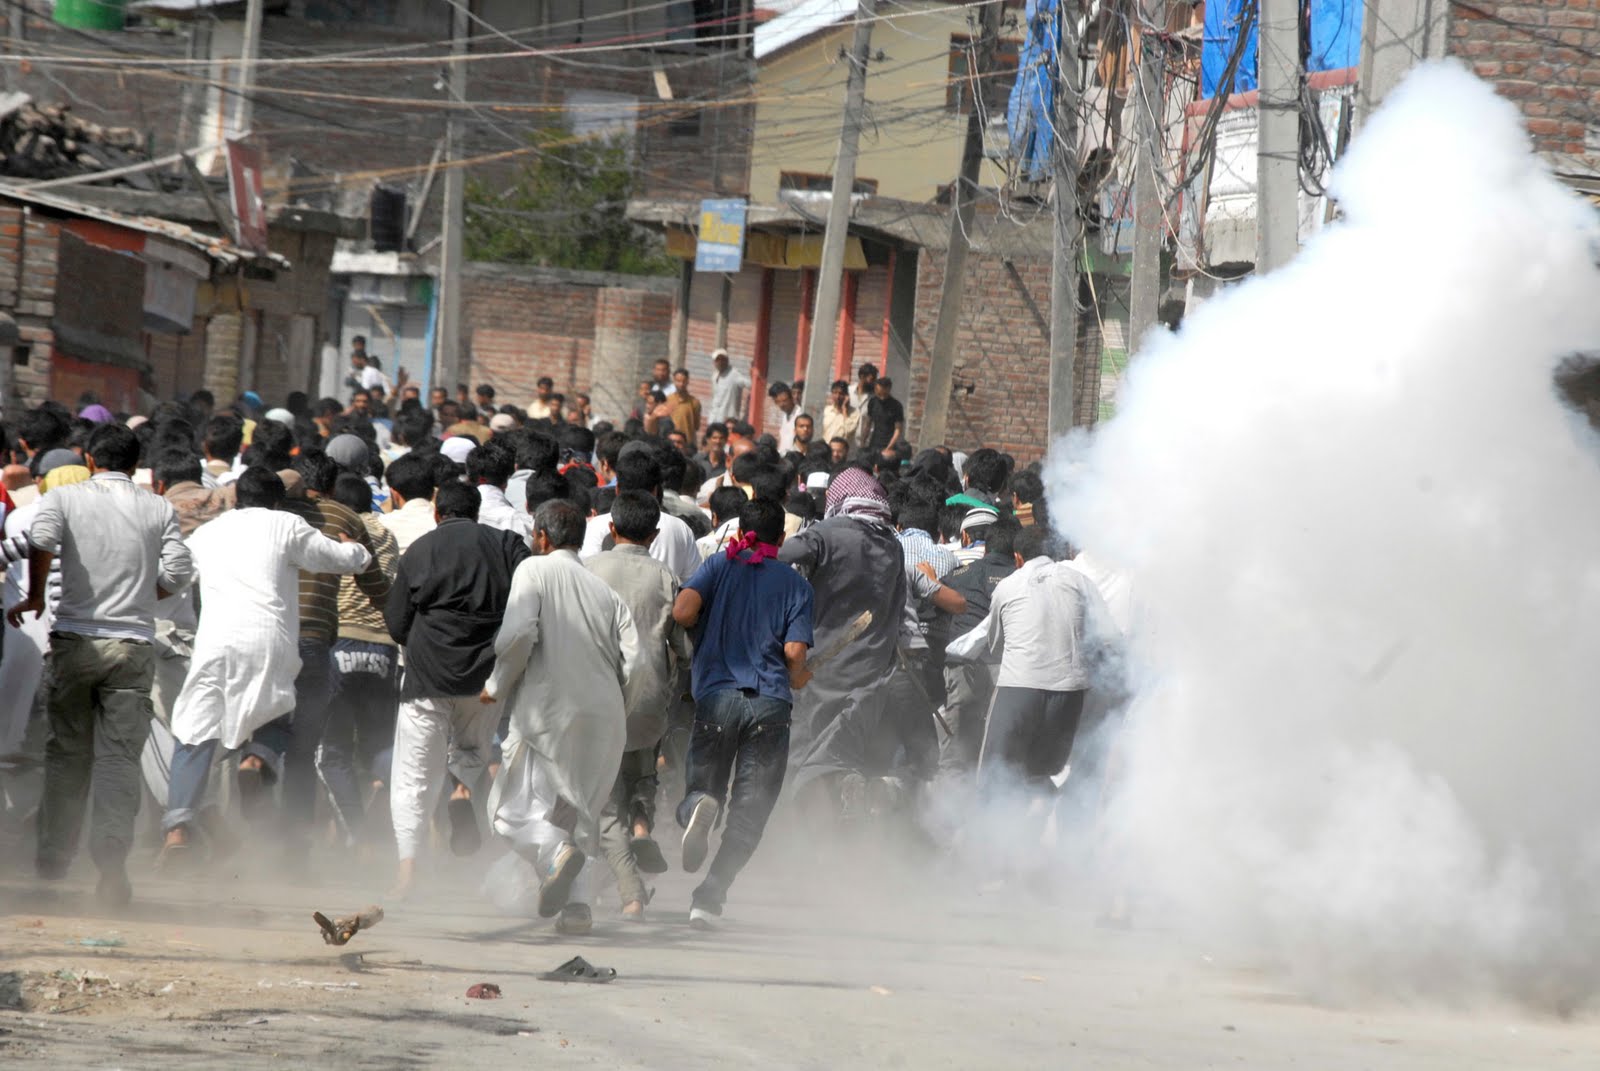 Stone throwing Kashmiri protesters being tear gassed